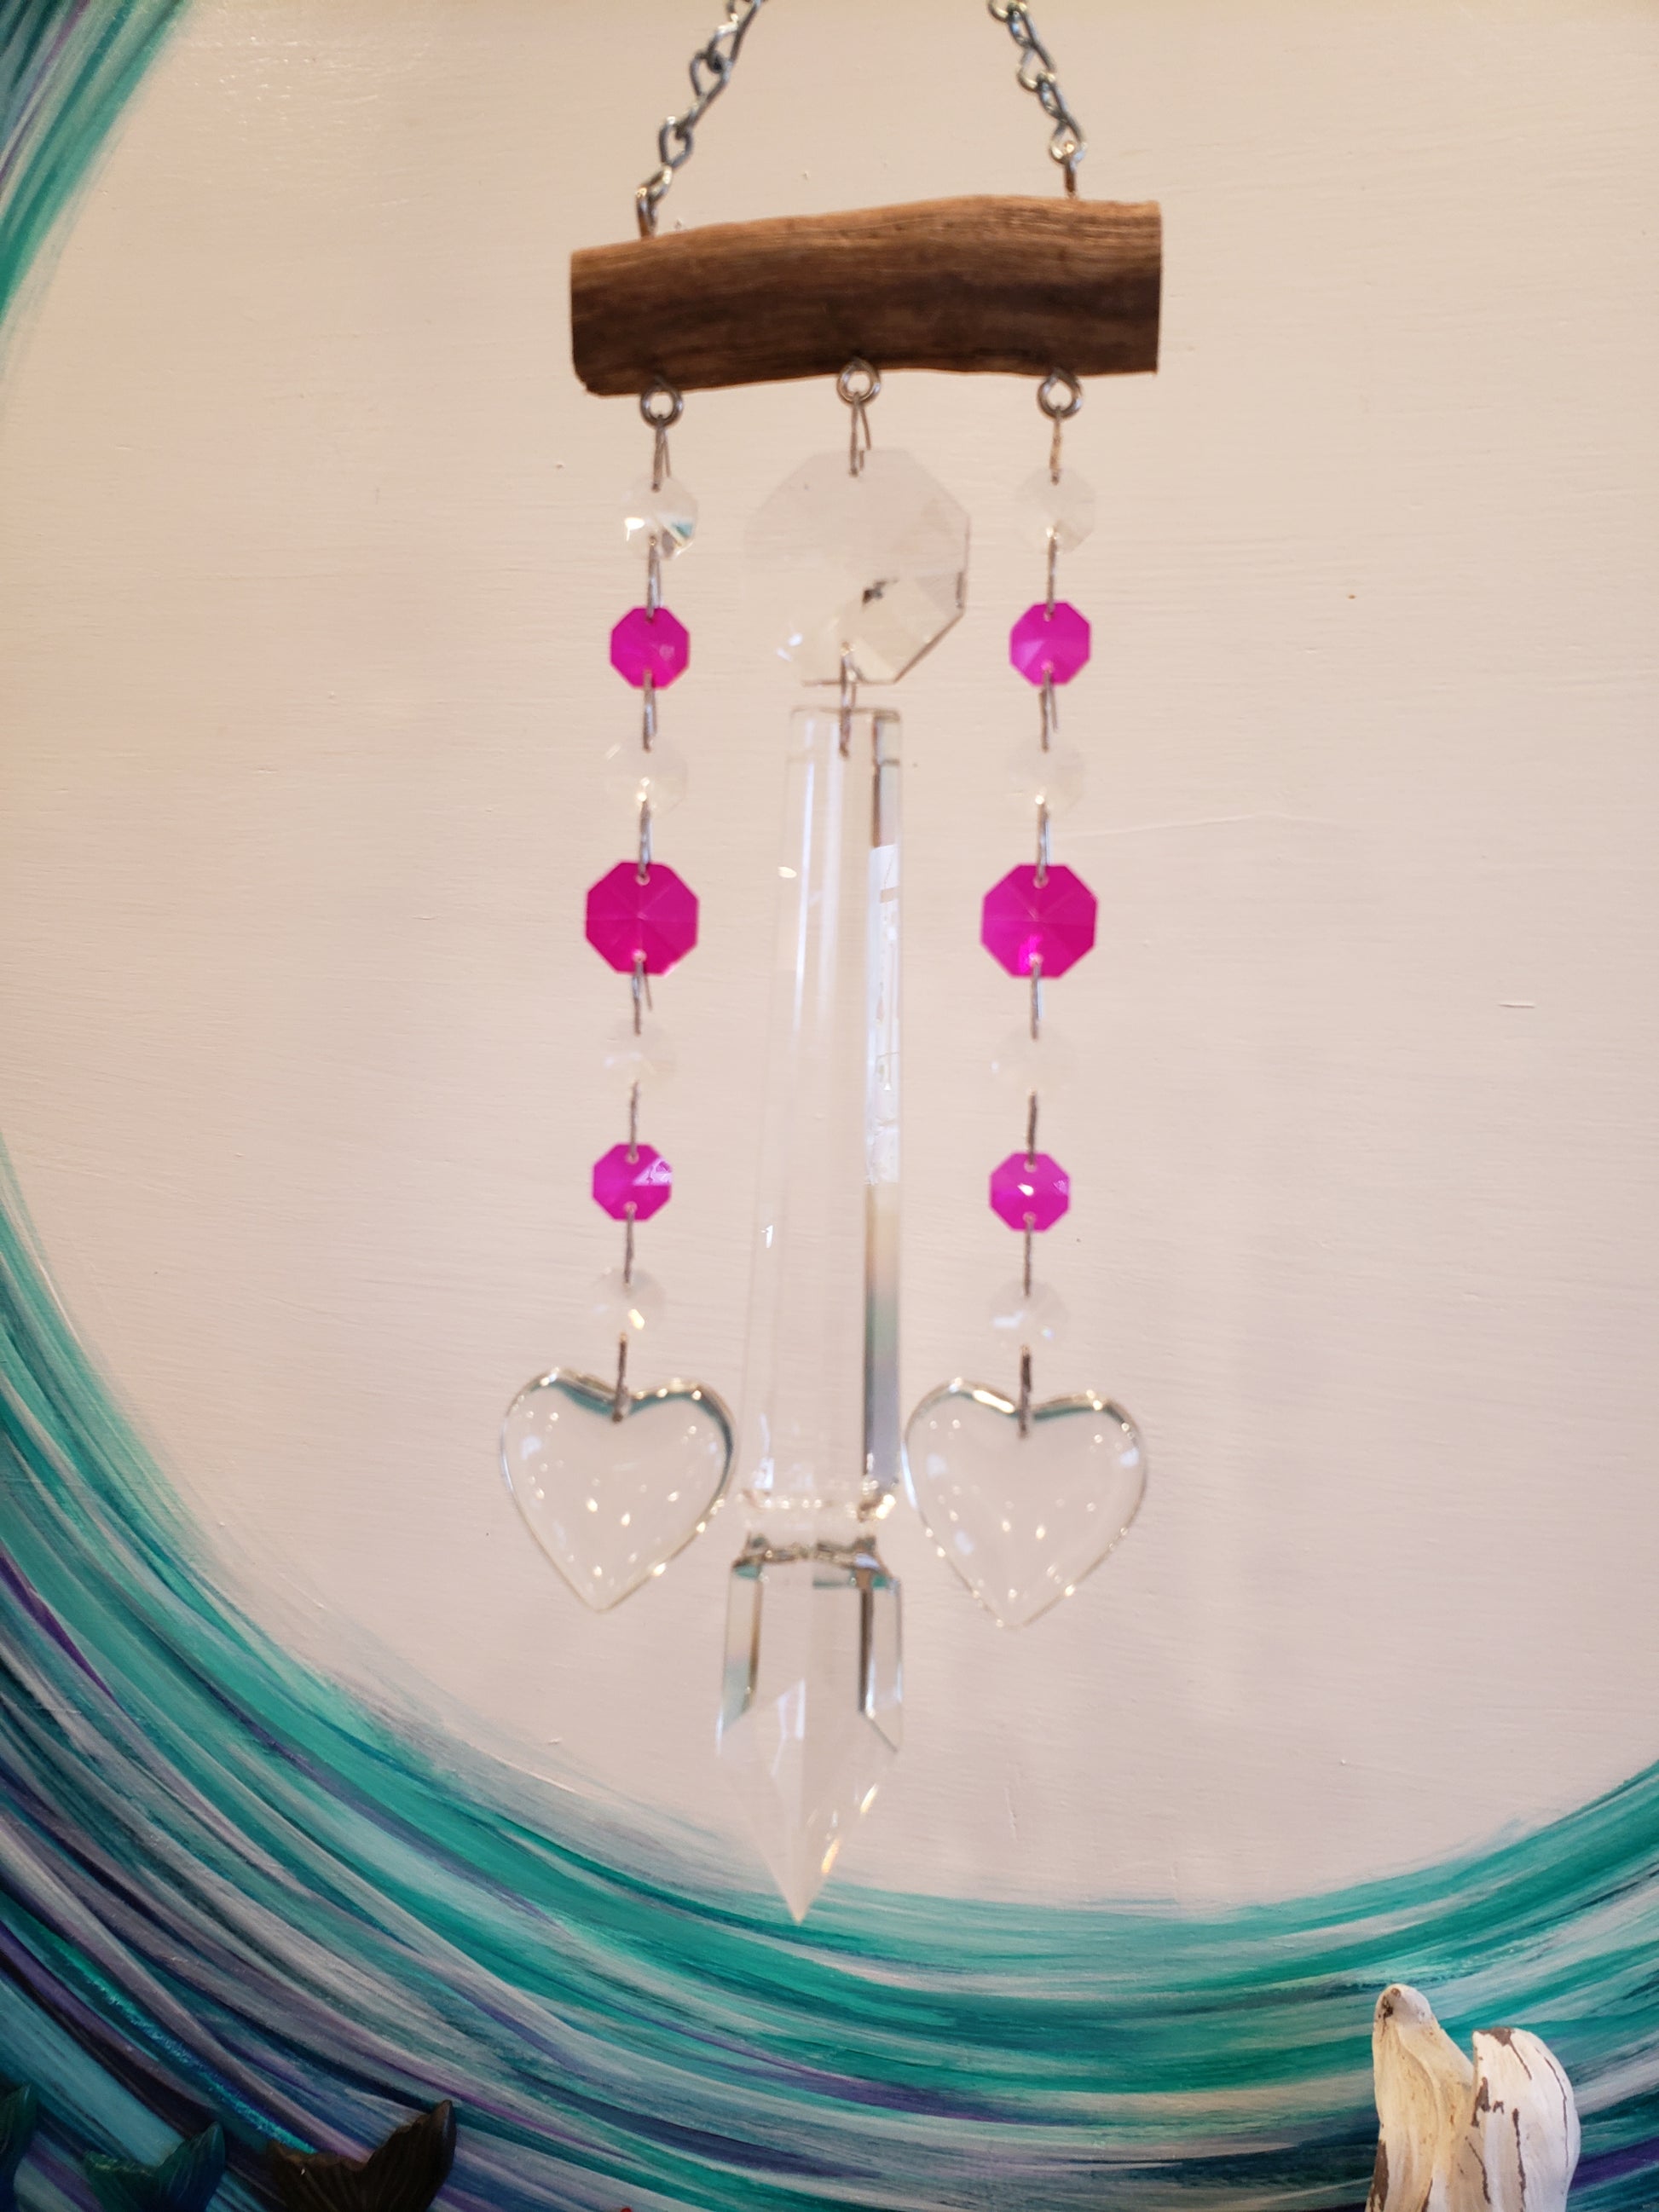 Dazzling Driftwood hand made chanxelier crystal windchime